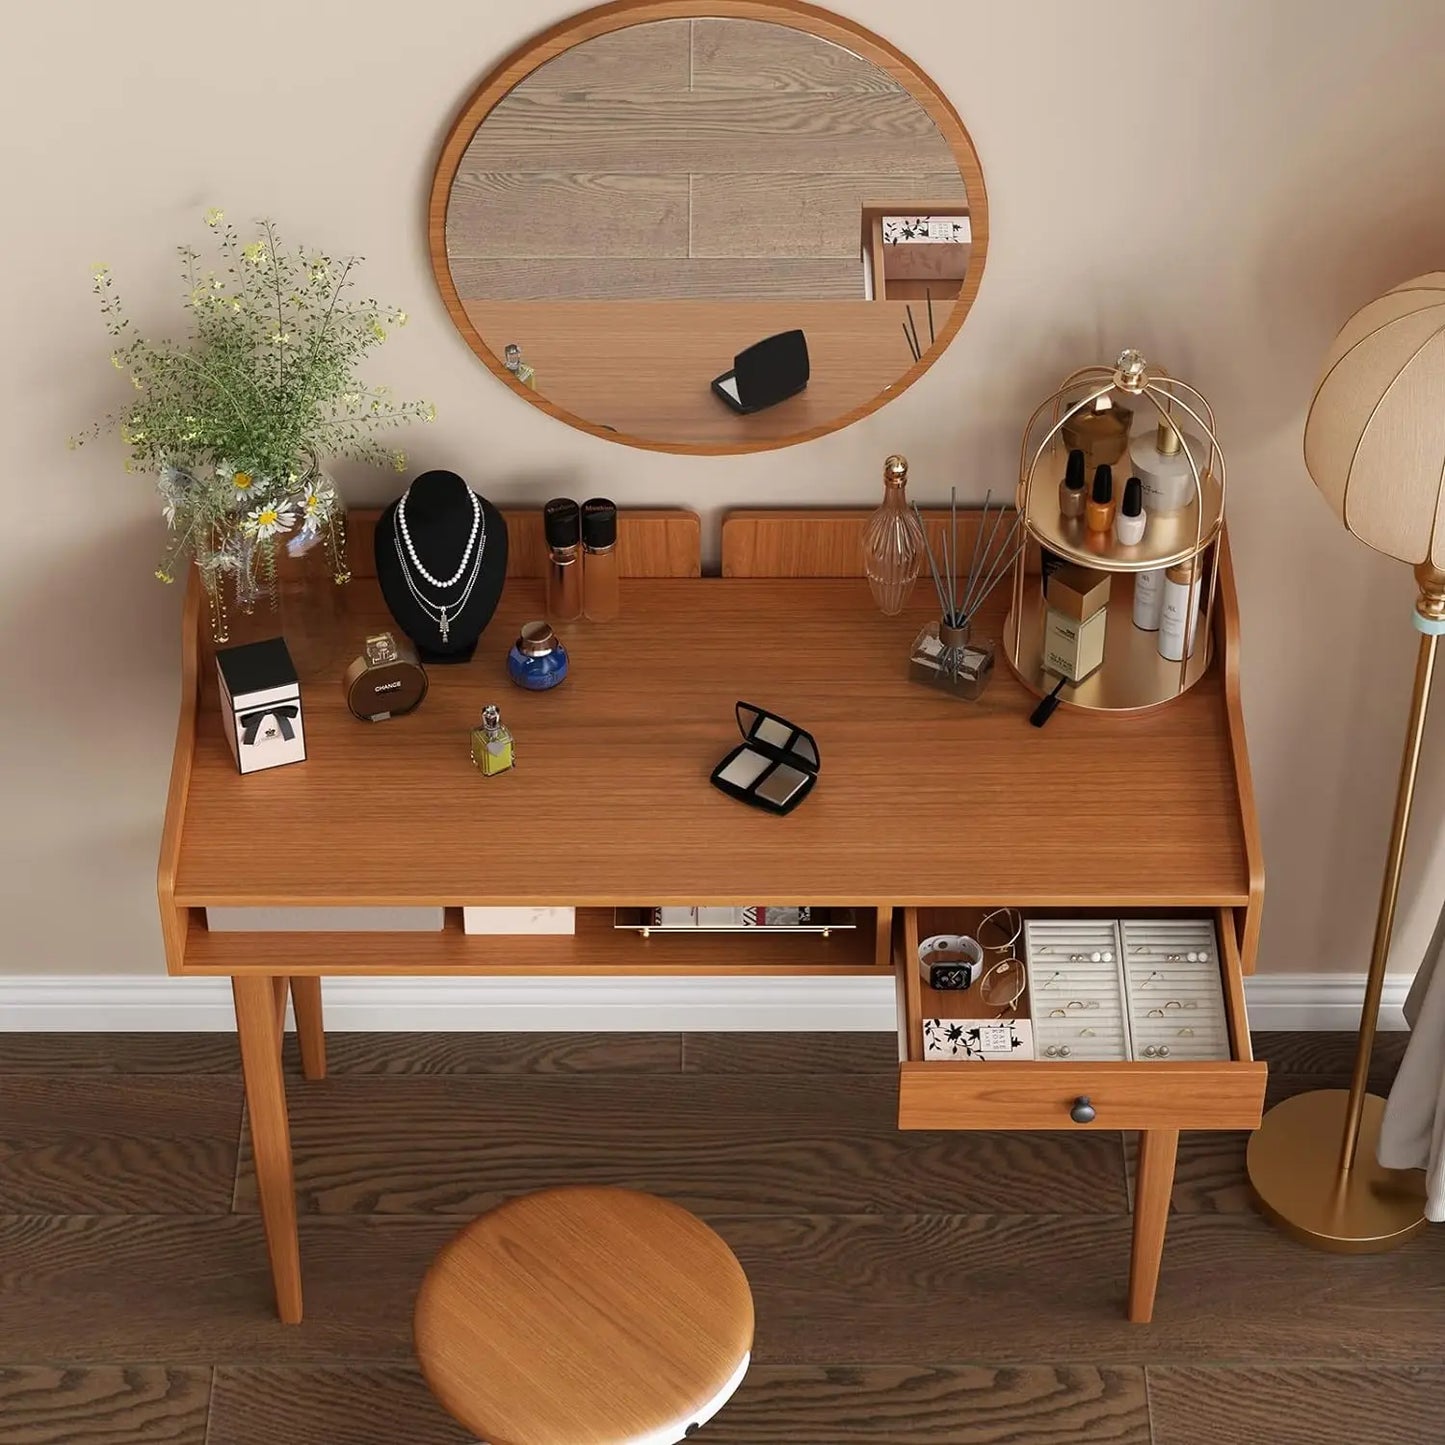 Vintage-Style Desk with Scandinavian Flair